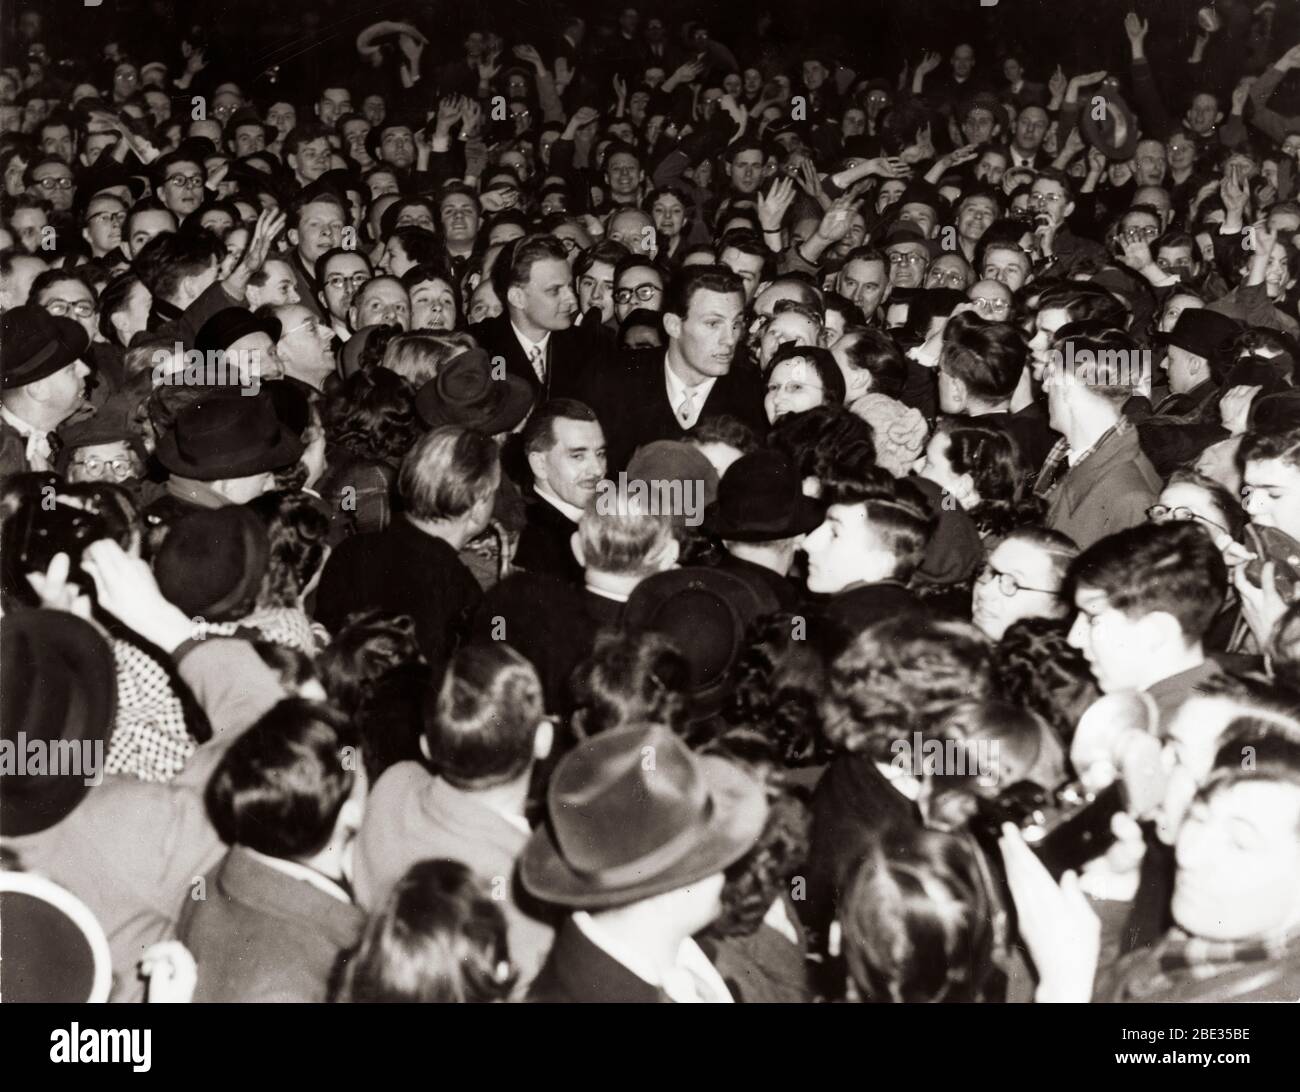 Oct. 2, 1960 - London, England, U.K. - BILLY GRAHAM, born William Franklin Graham, Jr., is an evangelical Christian reverend and evangelist. He gained fame due to his sermons being broadcast on the radio and television. PICTURED: Billy Graham being surrounded by fans. Stock Photo